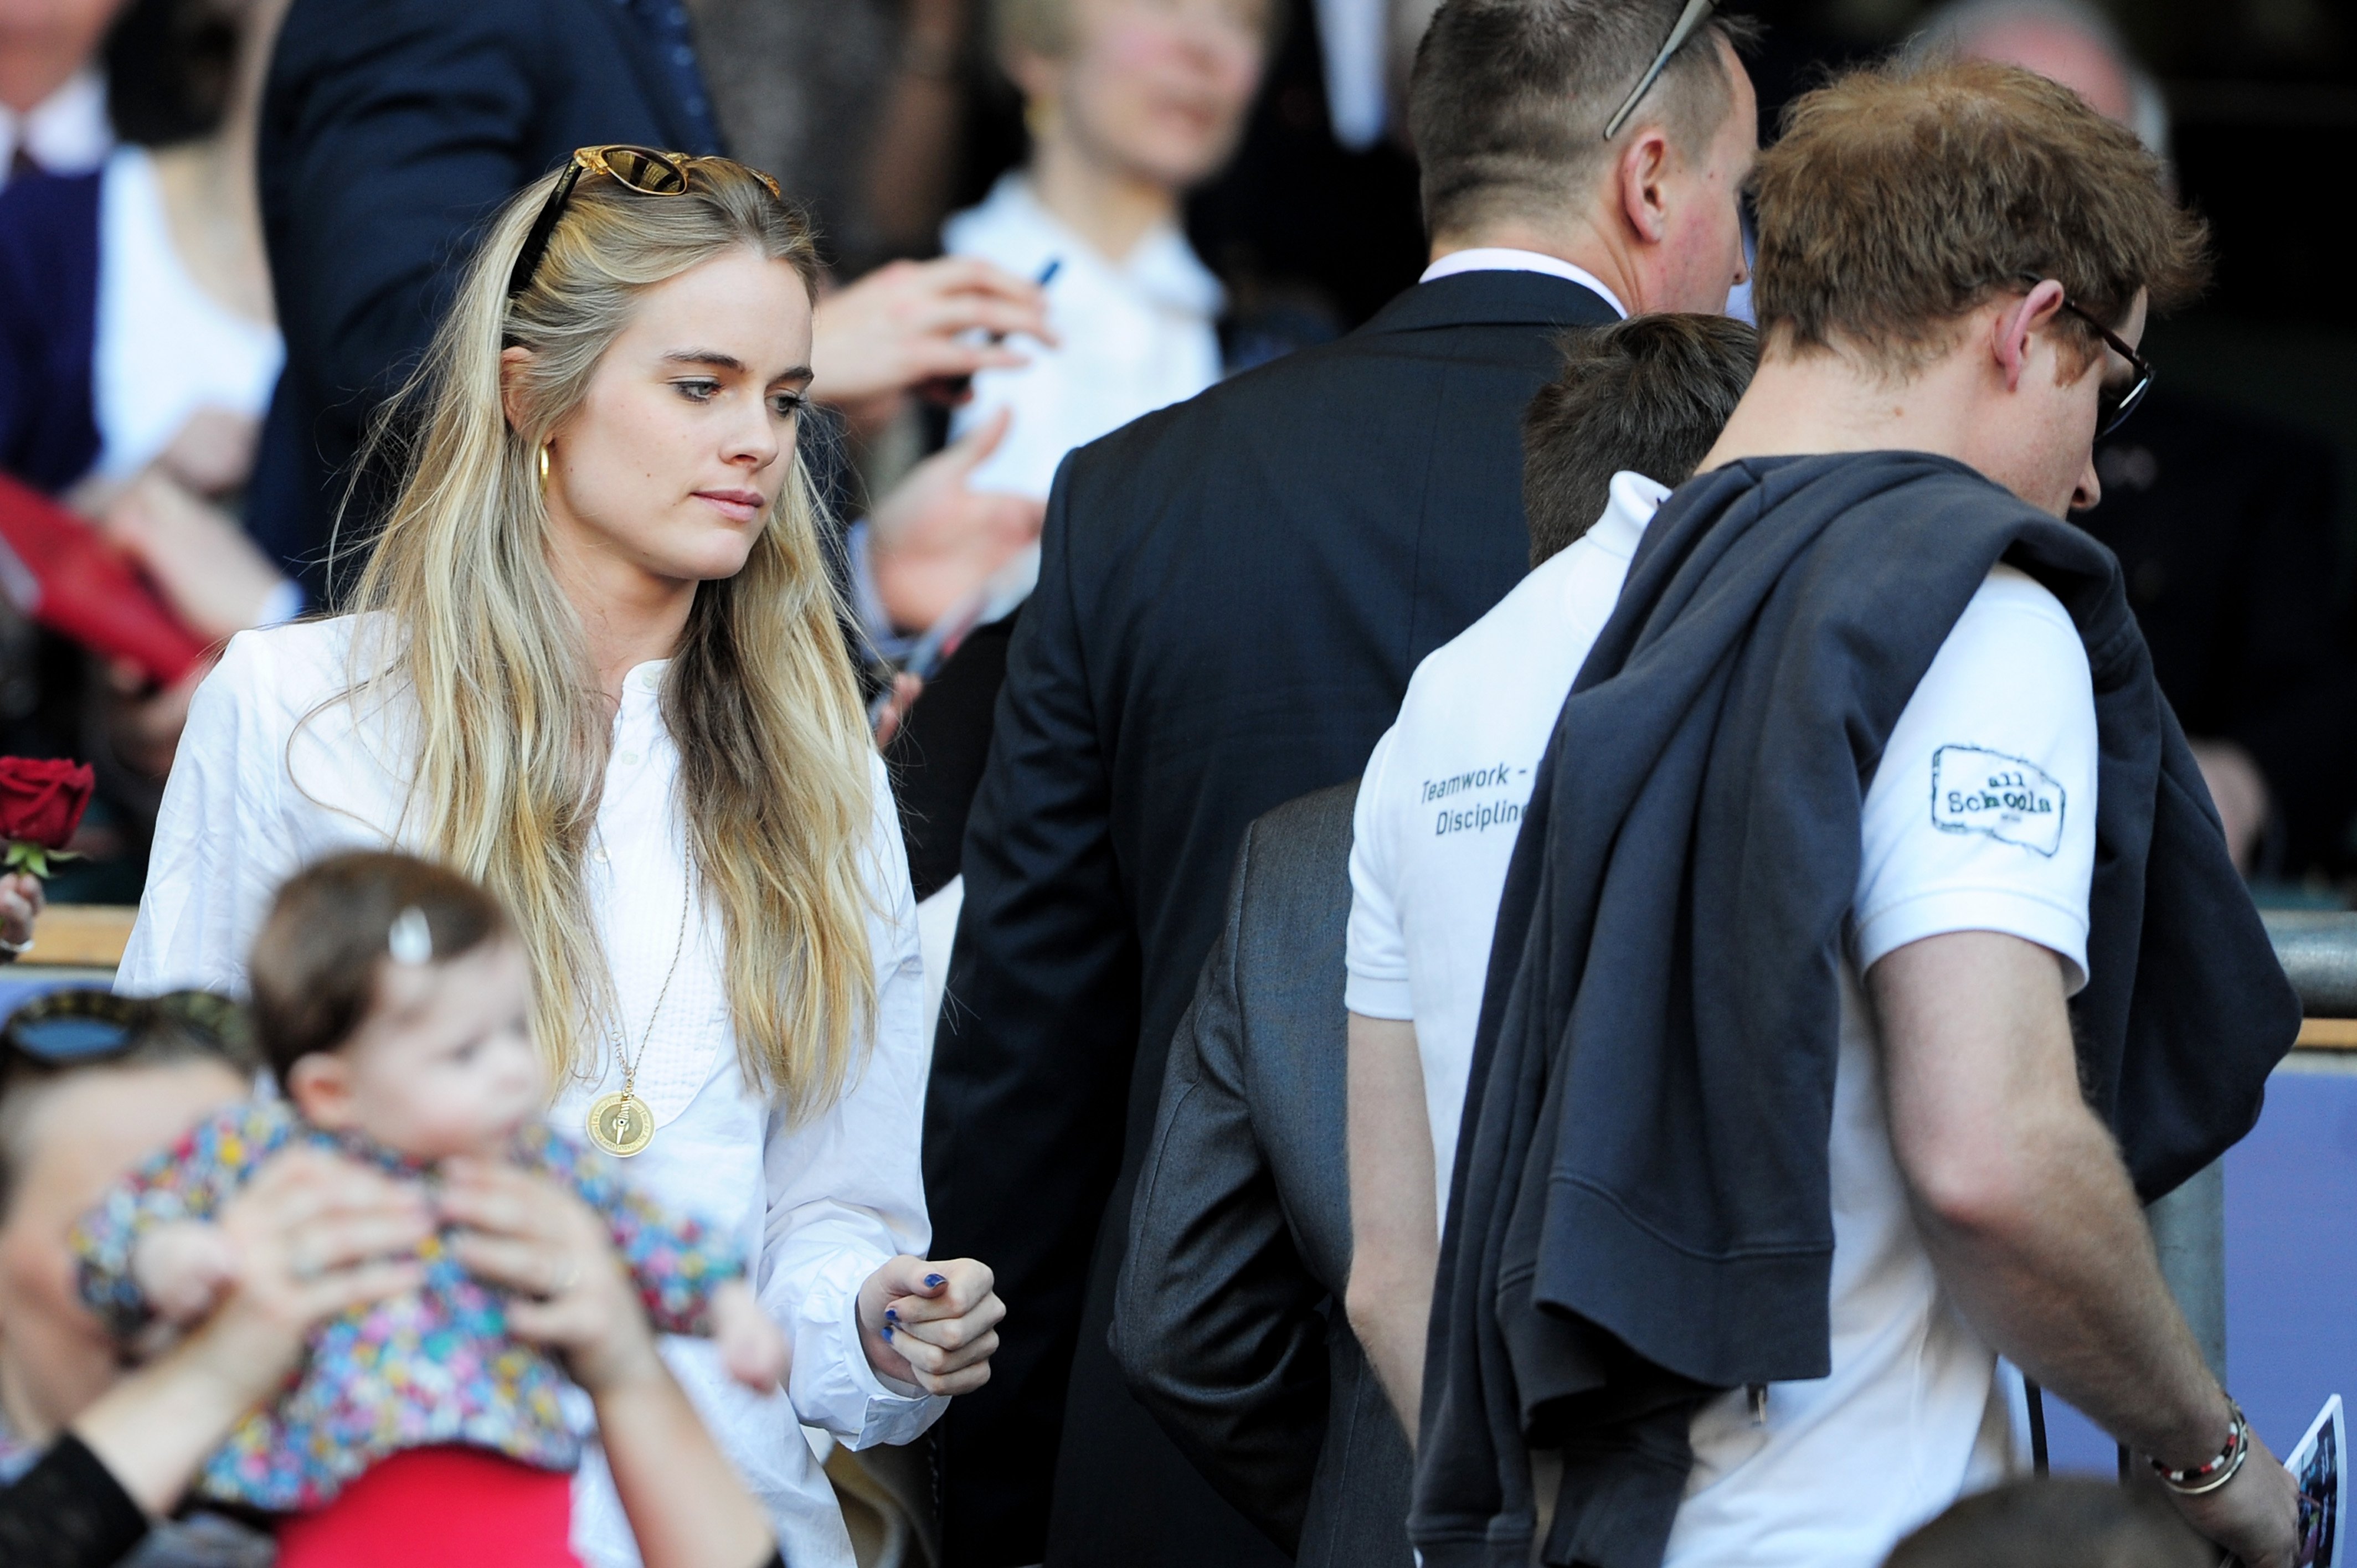 Cressida Bonas and Prince Harry taking their seats at the RBS Six Nations match between England and Wales at Twickenham Stadium in London, England | Photo: Getty Images